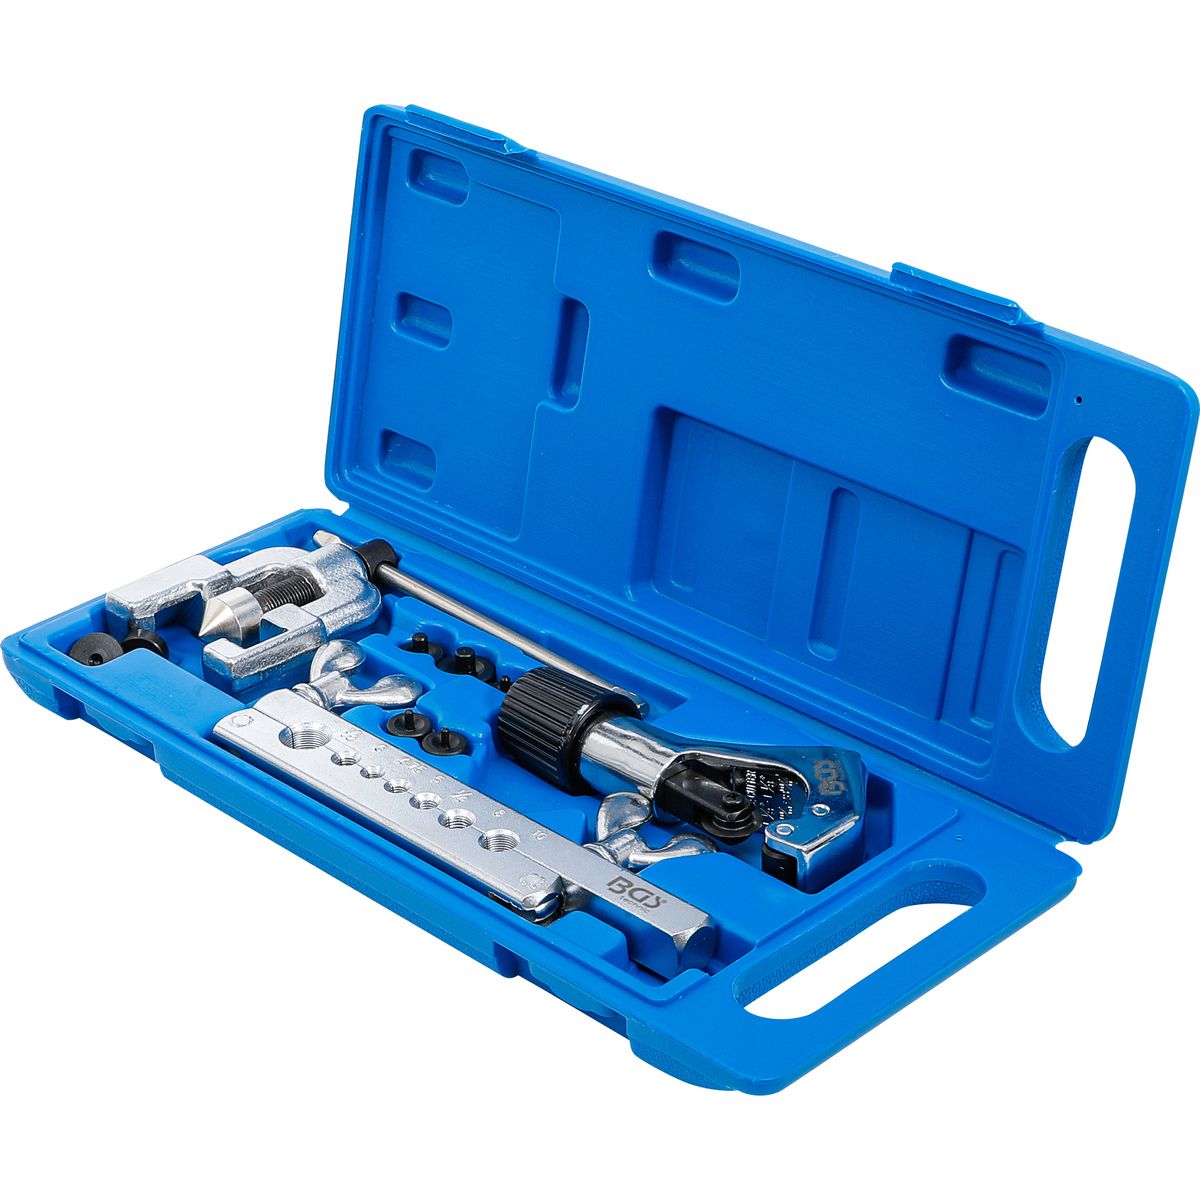 Double Flaring Tool Kit with Pipe Cutter | 10 pcs.